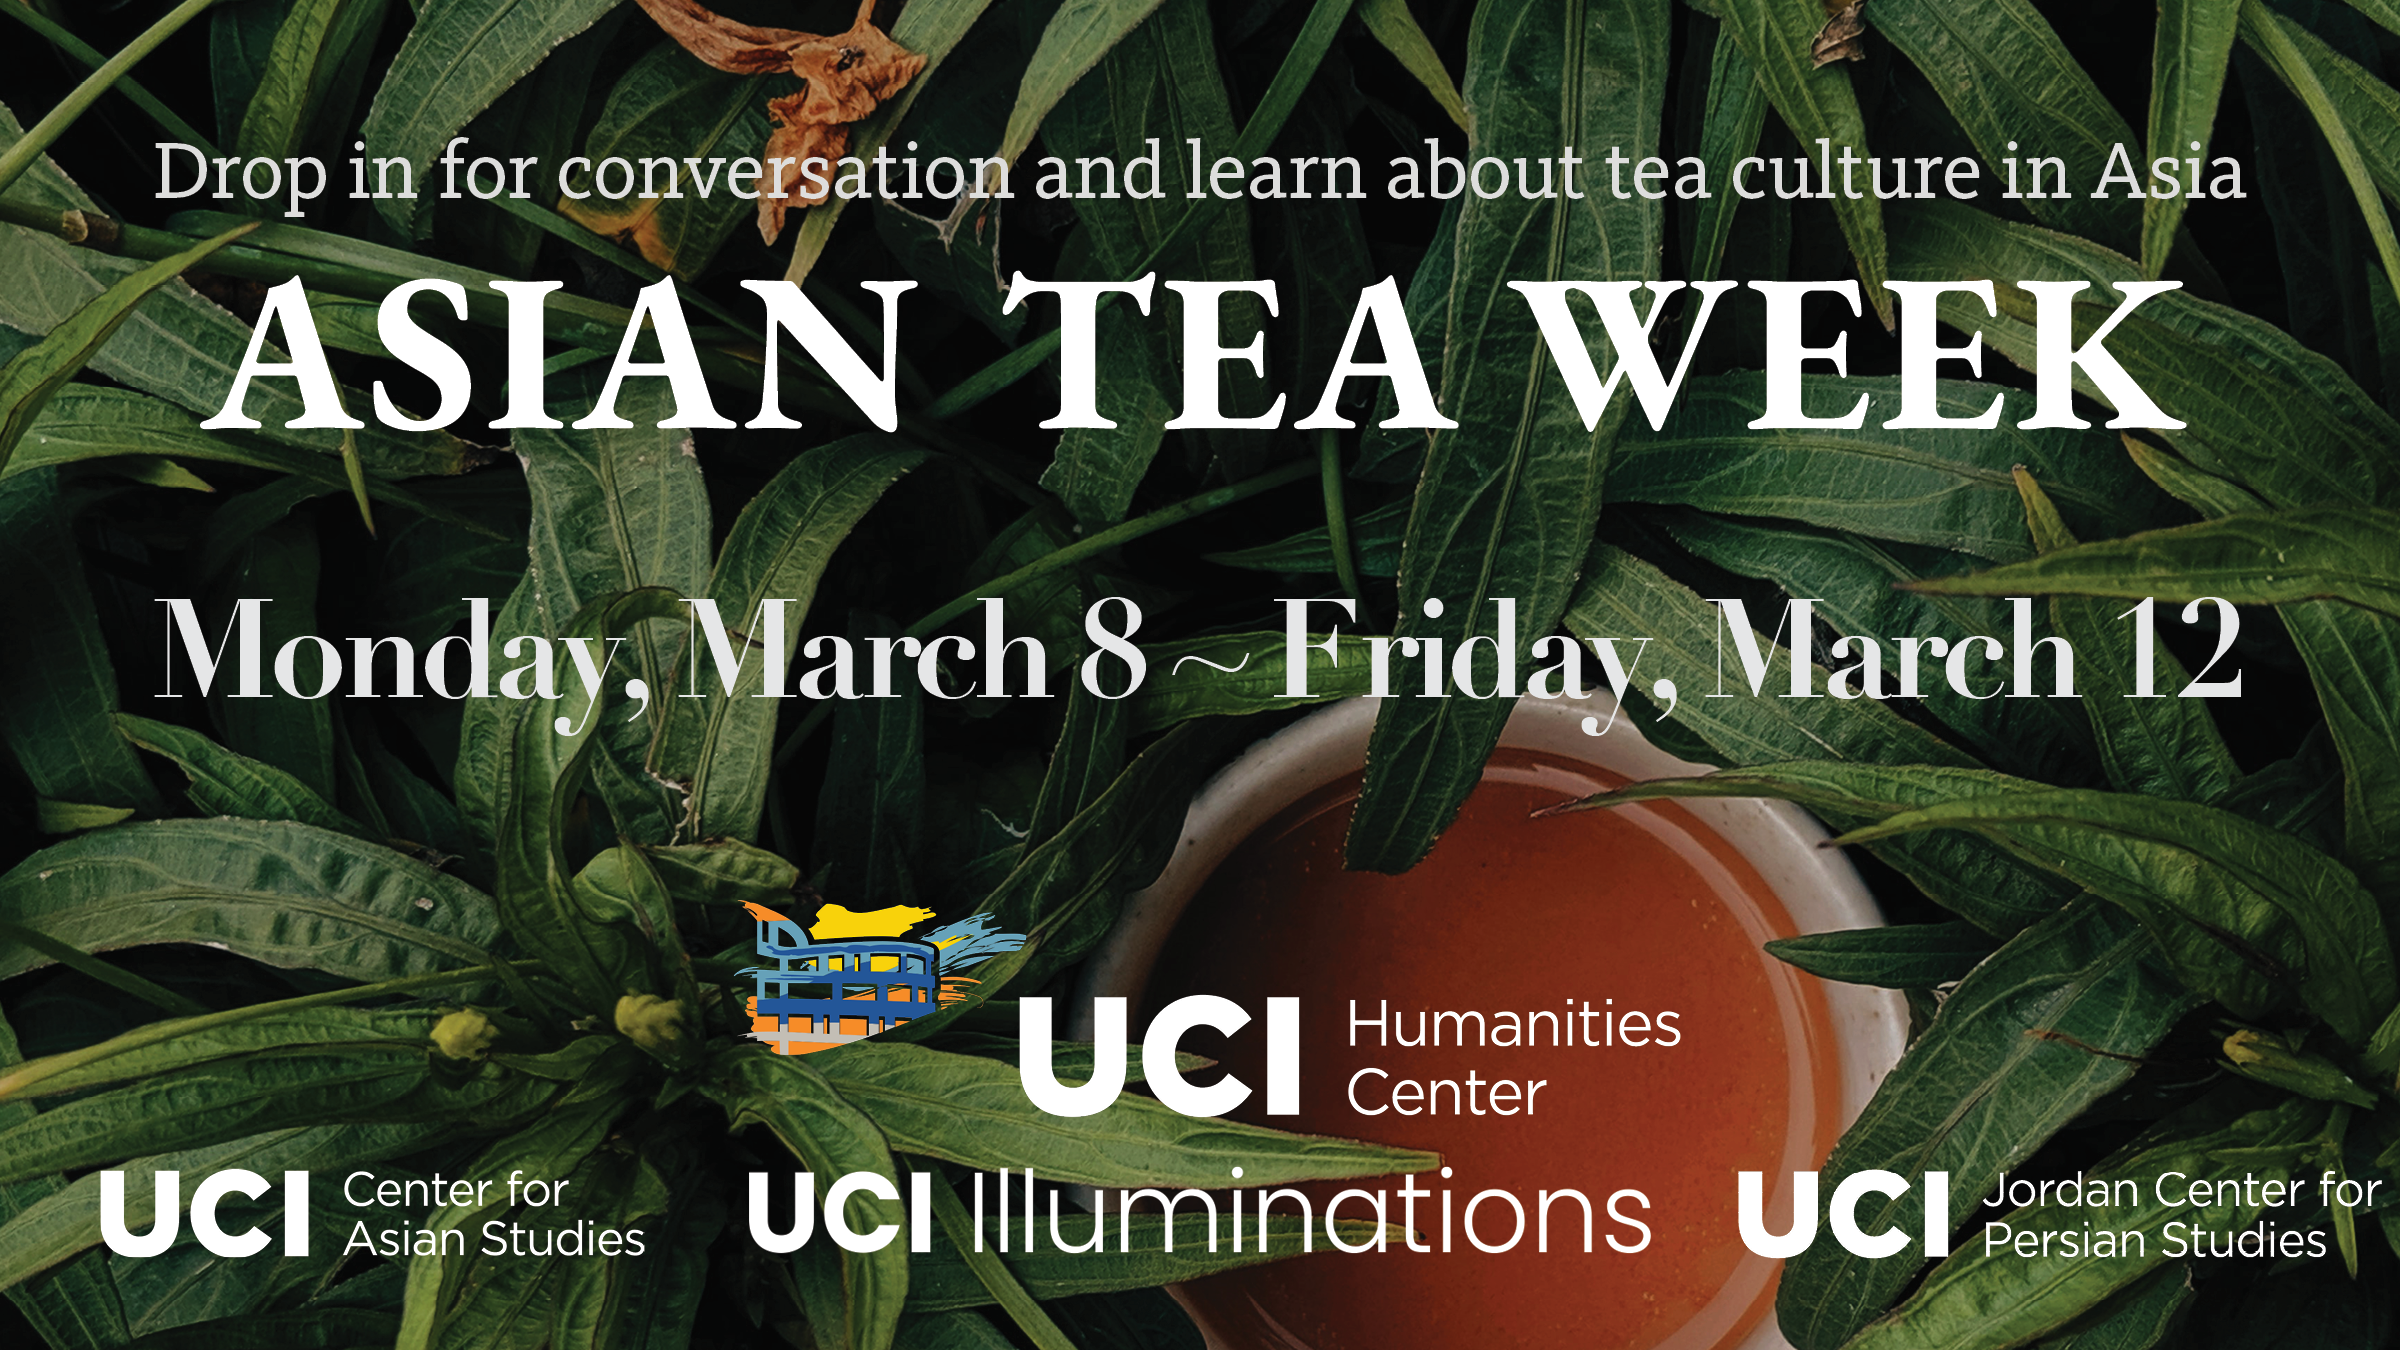 Asian Tea Week, Monday March 8 - Friday March 12